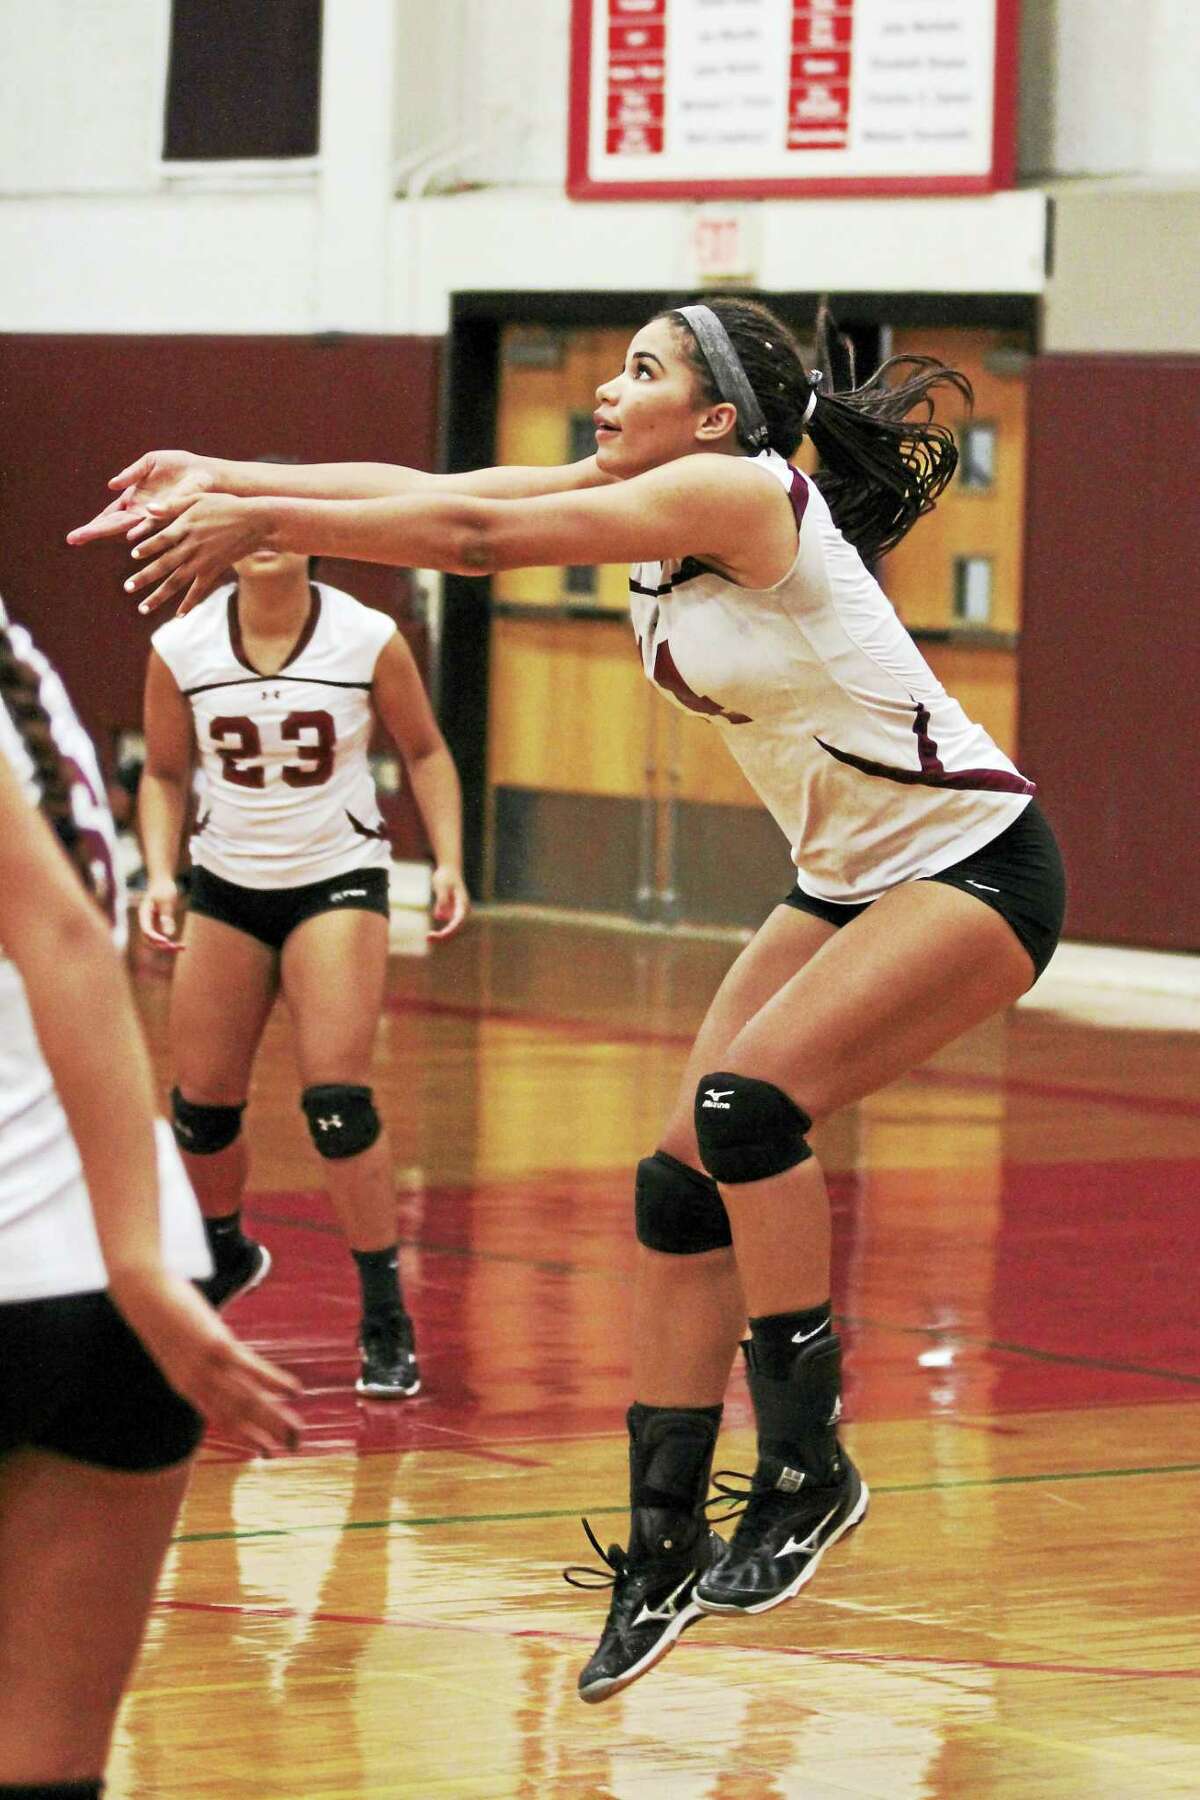 Photo by Marianne KillackeyTorrington middle hitter Jolie Fox ran off 12 straight points at the service line in the first game of a Red Raider sweep against St. Paul Catholic Tuesday night.